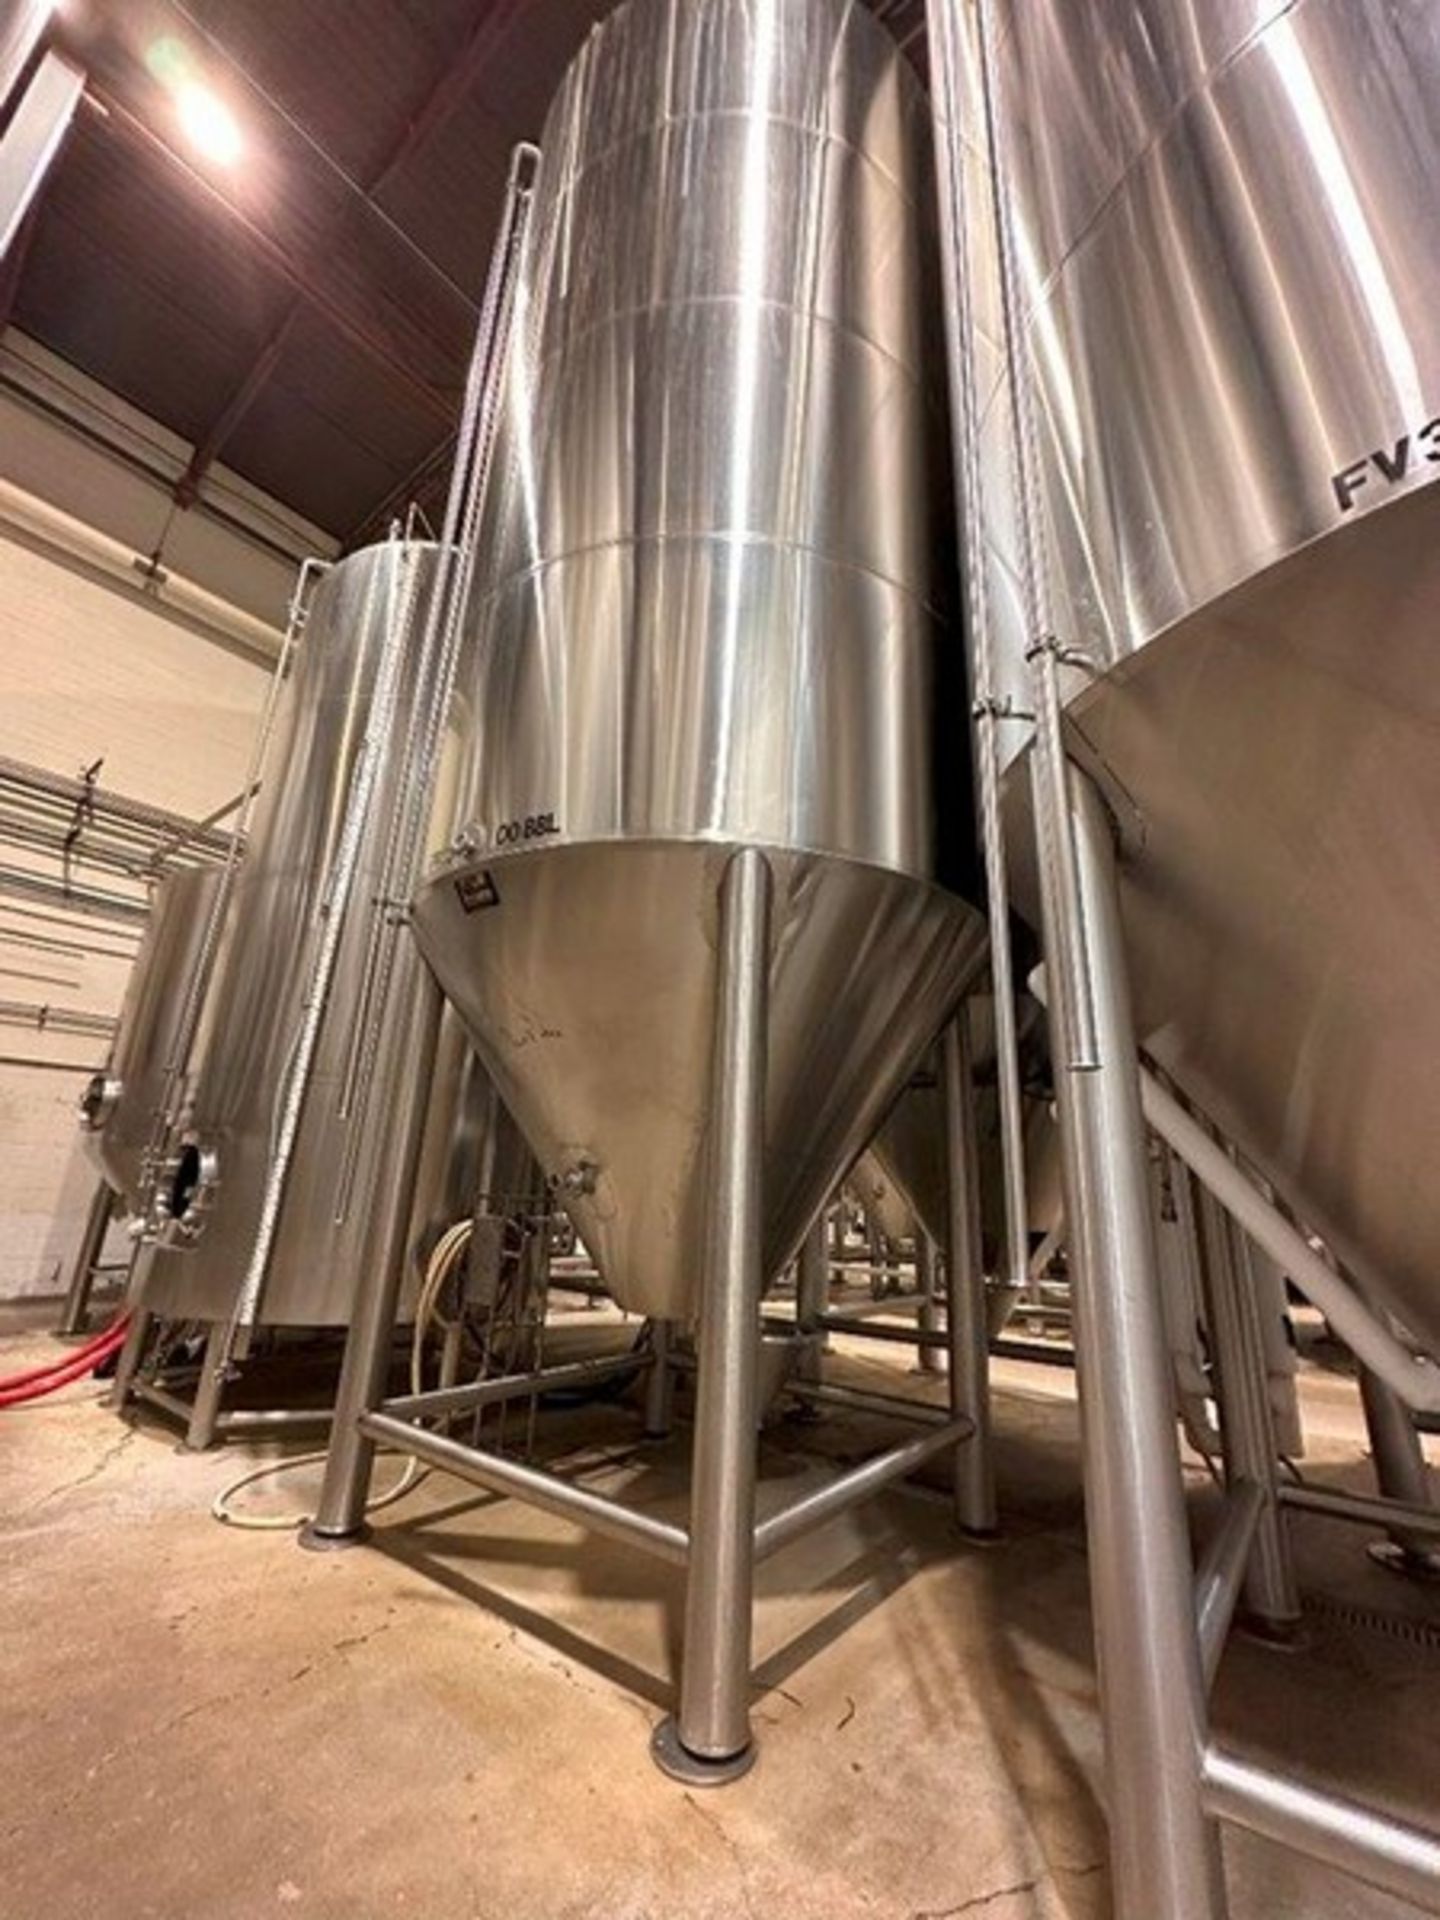 200 BBL (7991 gallon) Vertical Cone Bottom 304 Stainless Steel Jacketed Vessel. Manufactured by JV